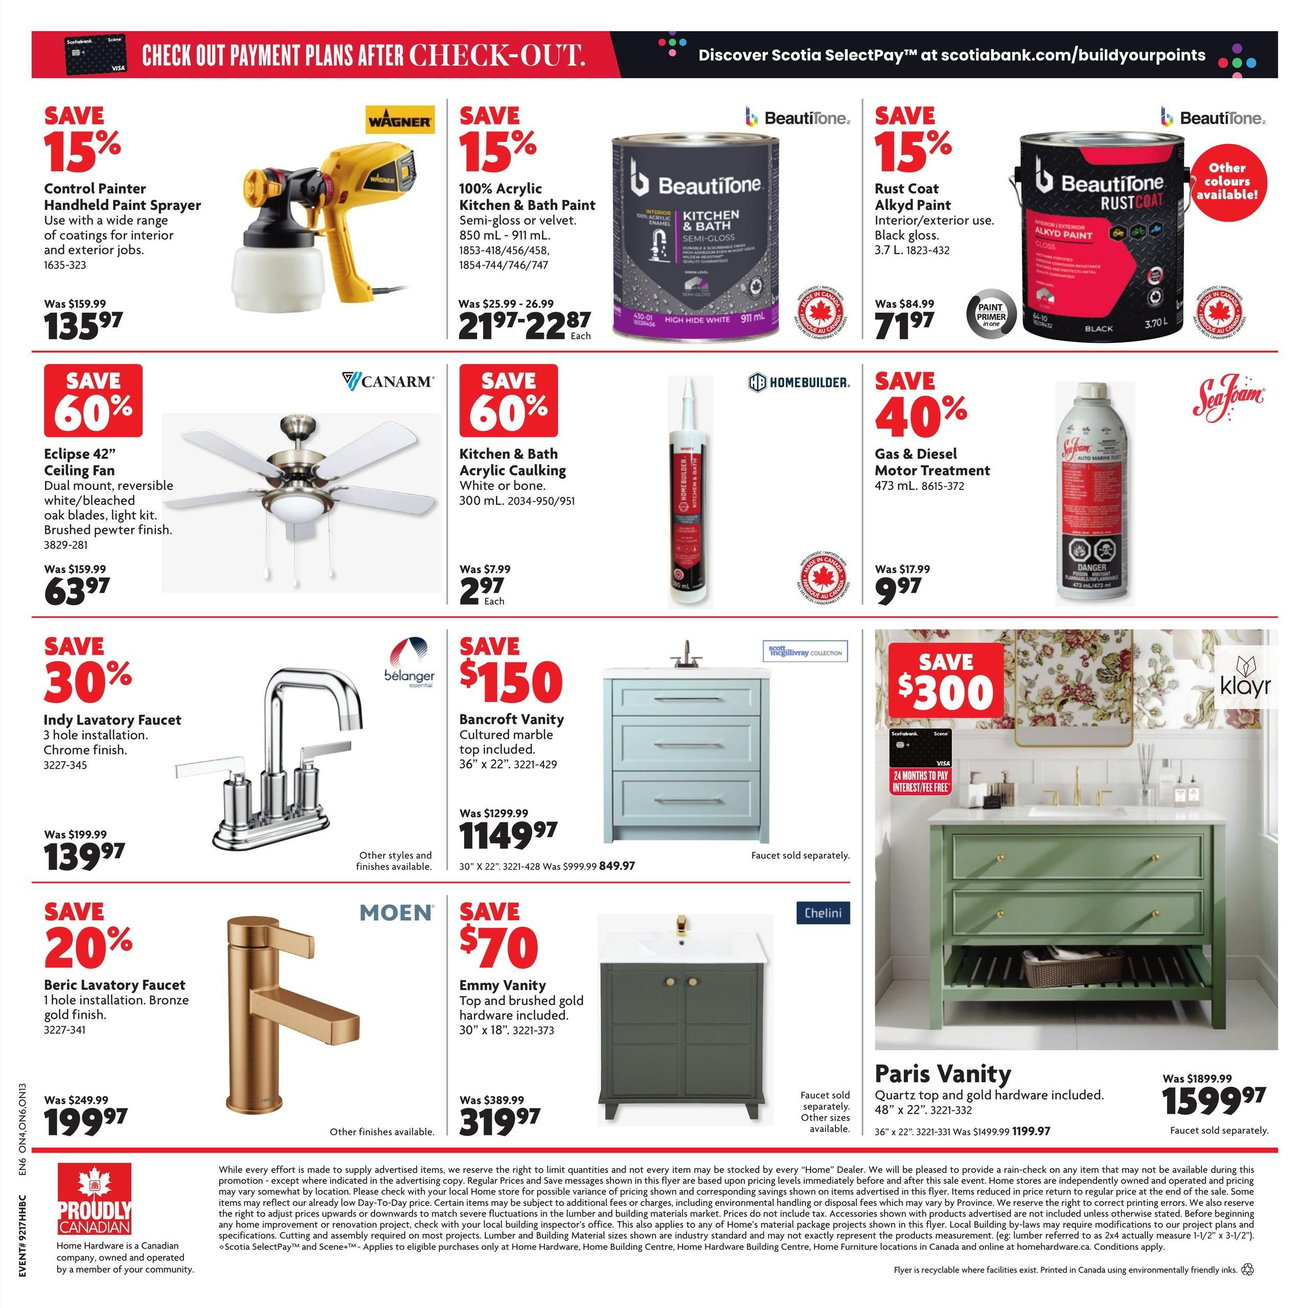 Home Hardware - Building Centre - Page 10